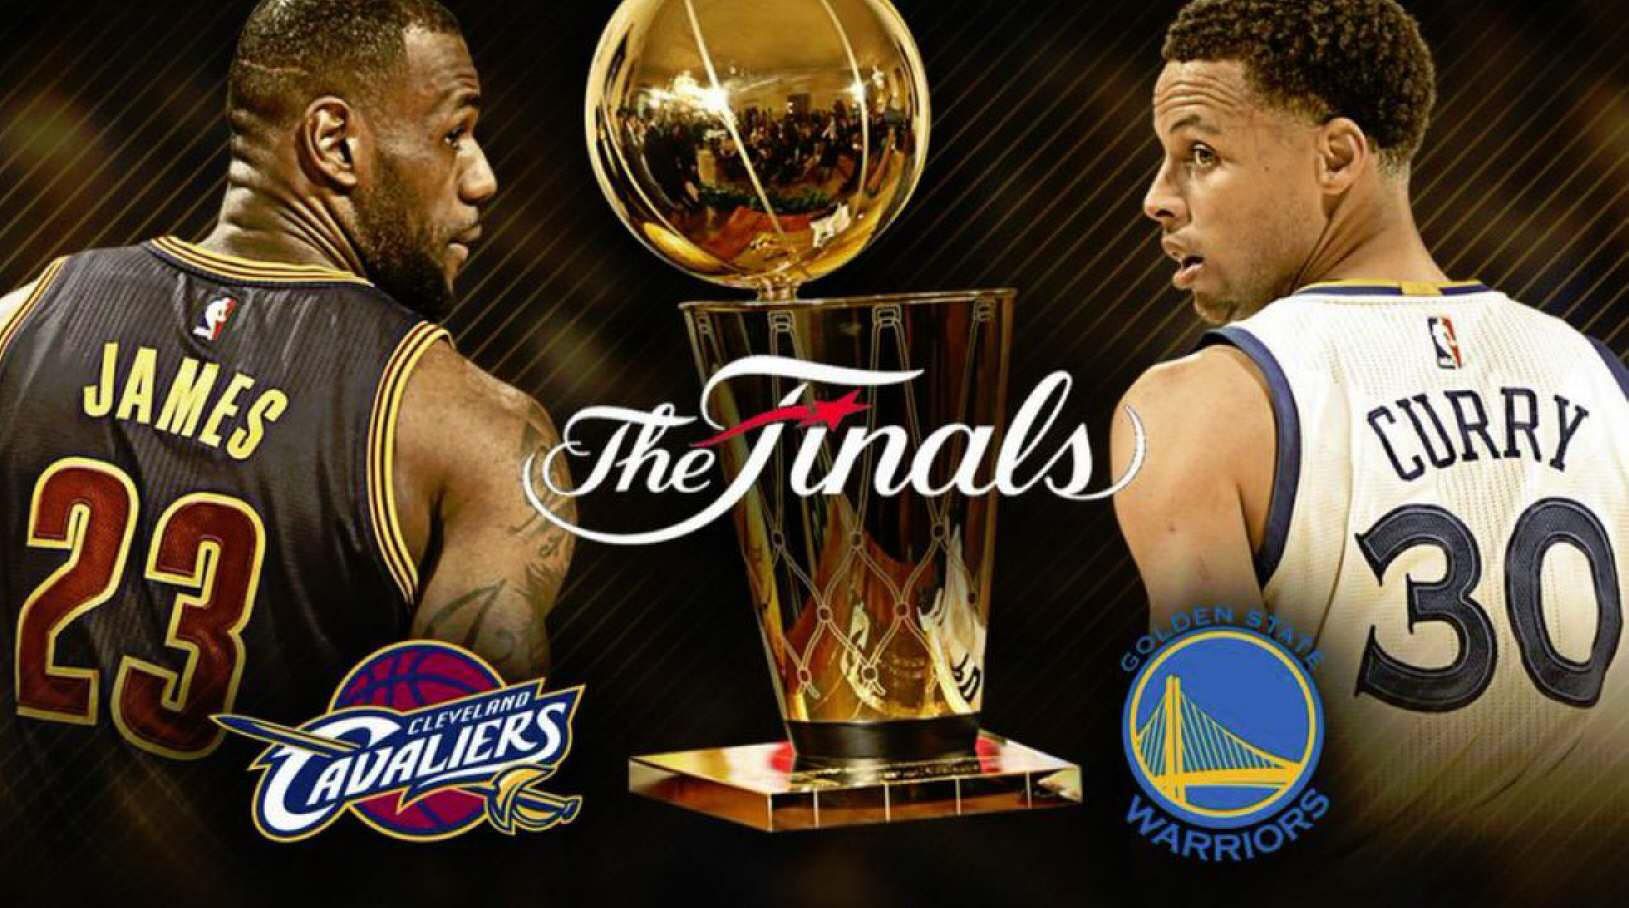 TV ratings for NBA Finals & Stanley Cup Finals slumping